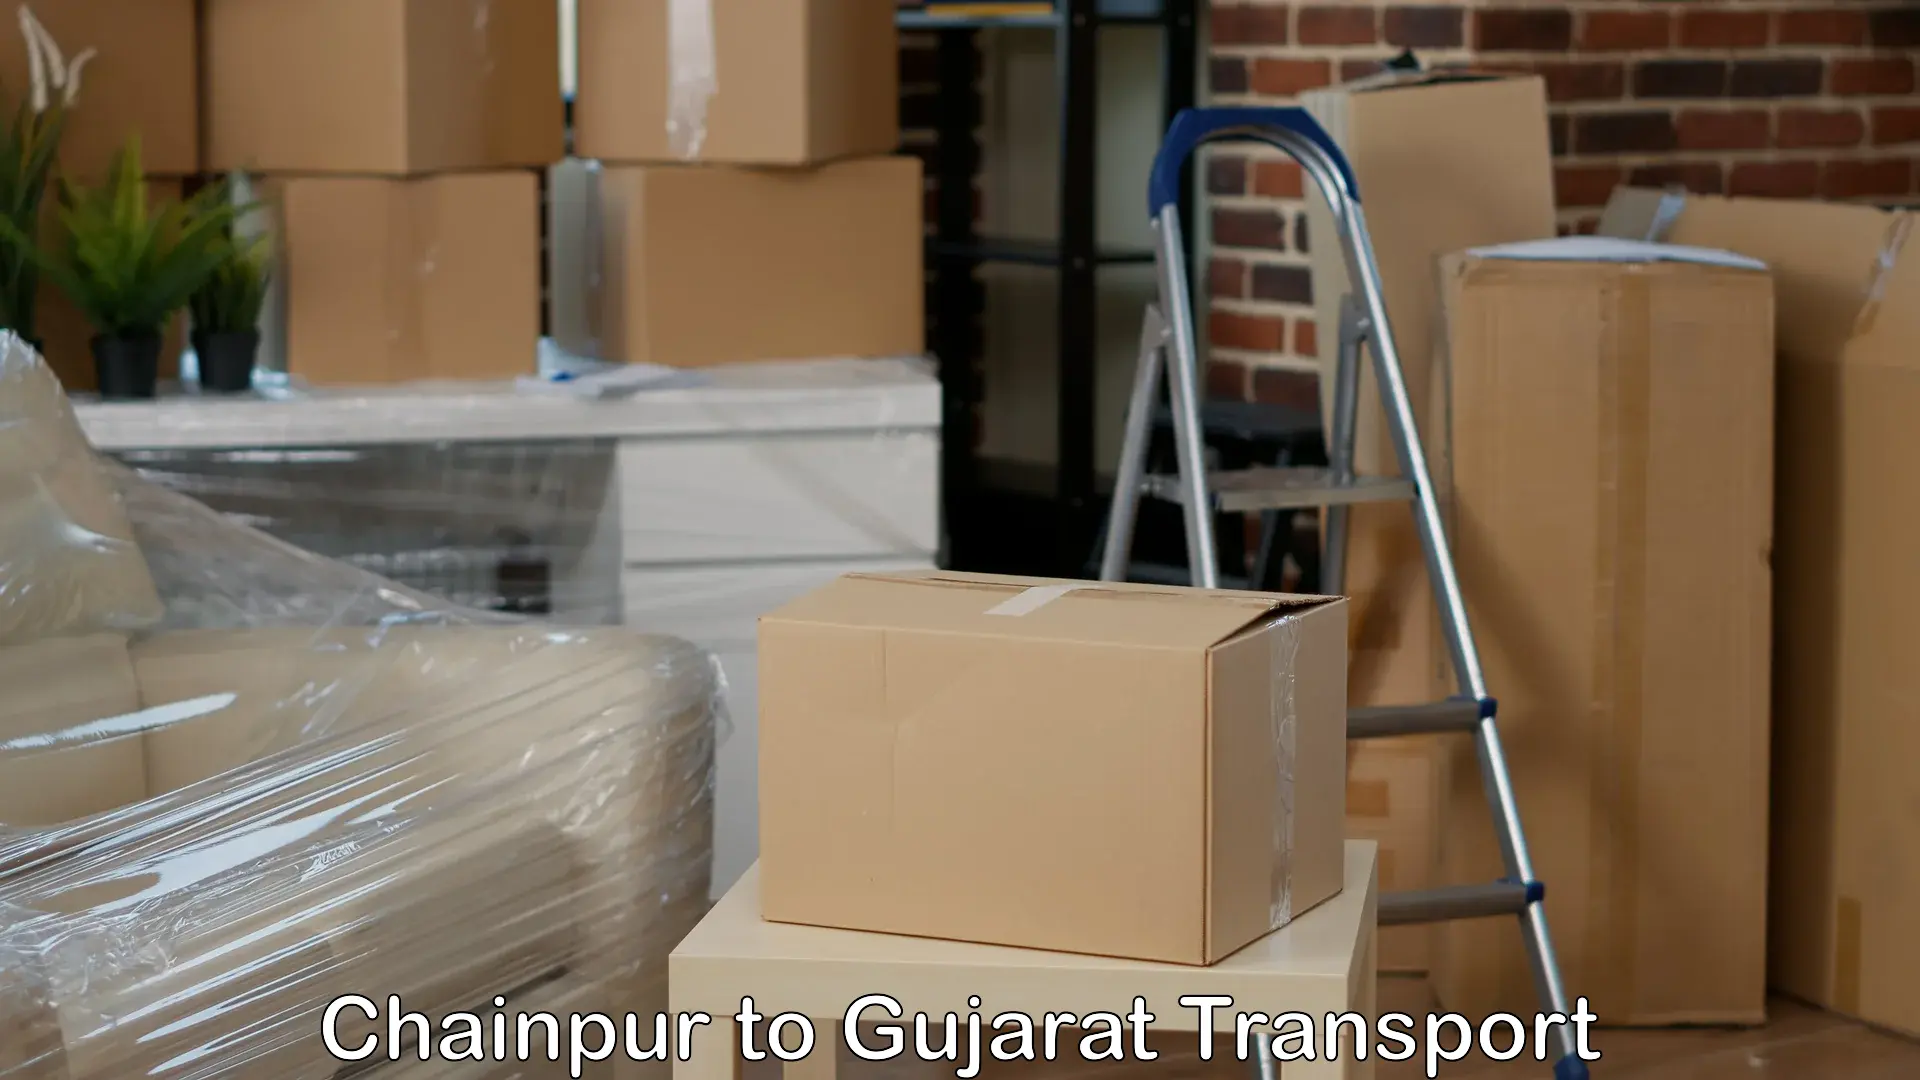 Commercial transport service Chainpur to Mundra